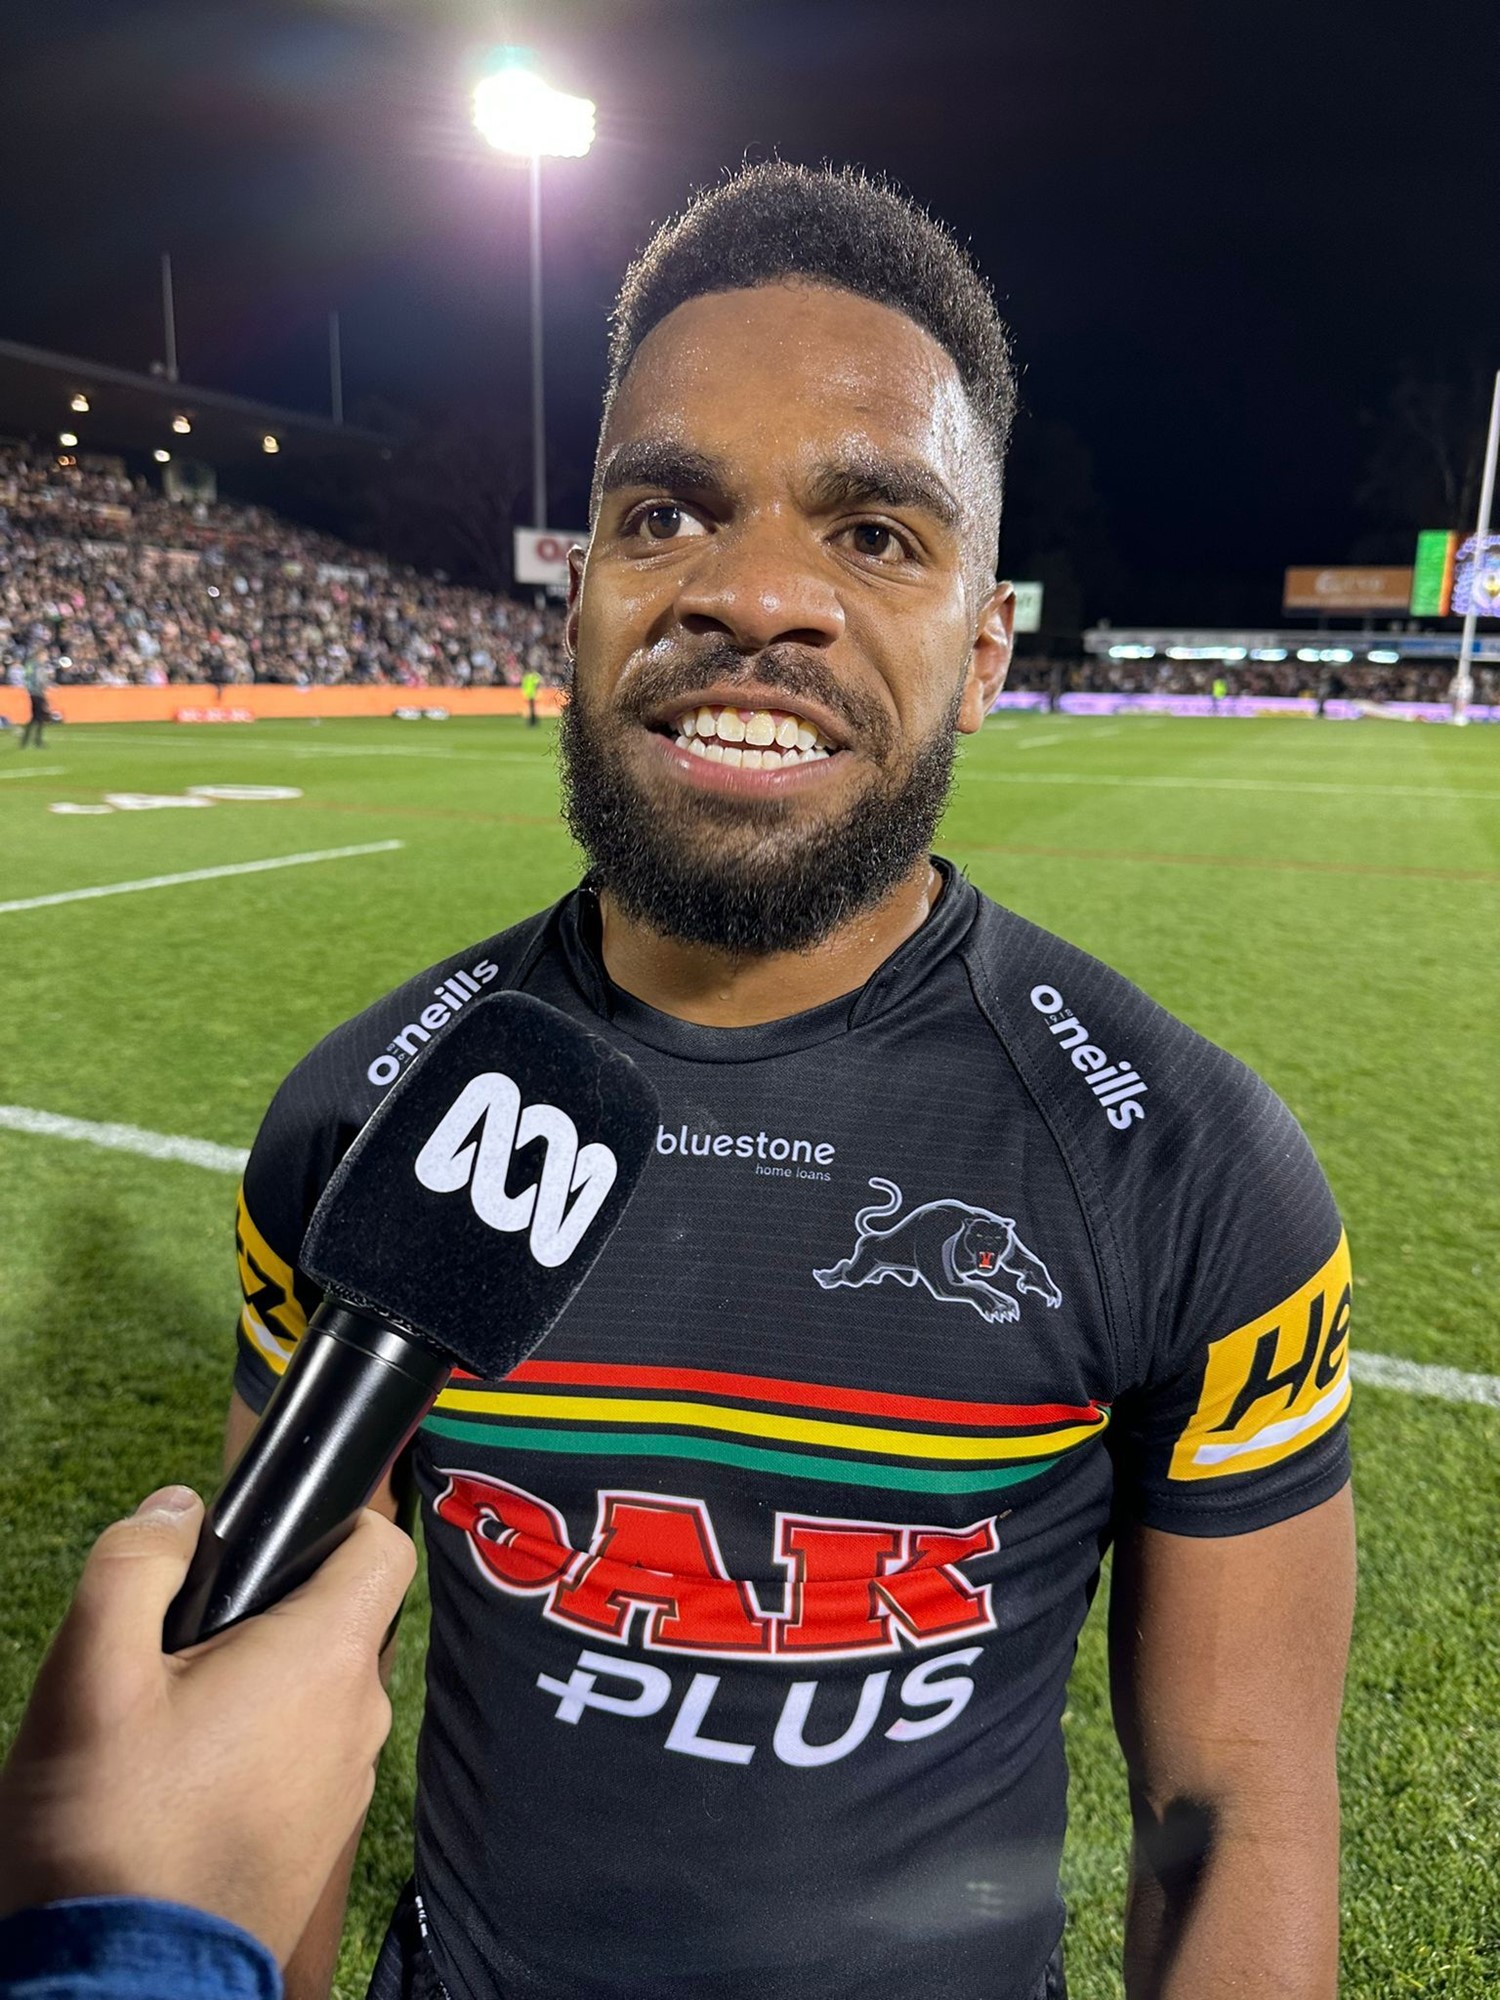 Penrith Panthers seal NRL minor premiership, Newcastle claim fifth with win  over Dragons, Dolphins smash Warriors - ABC News